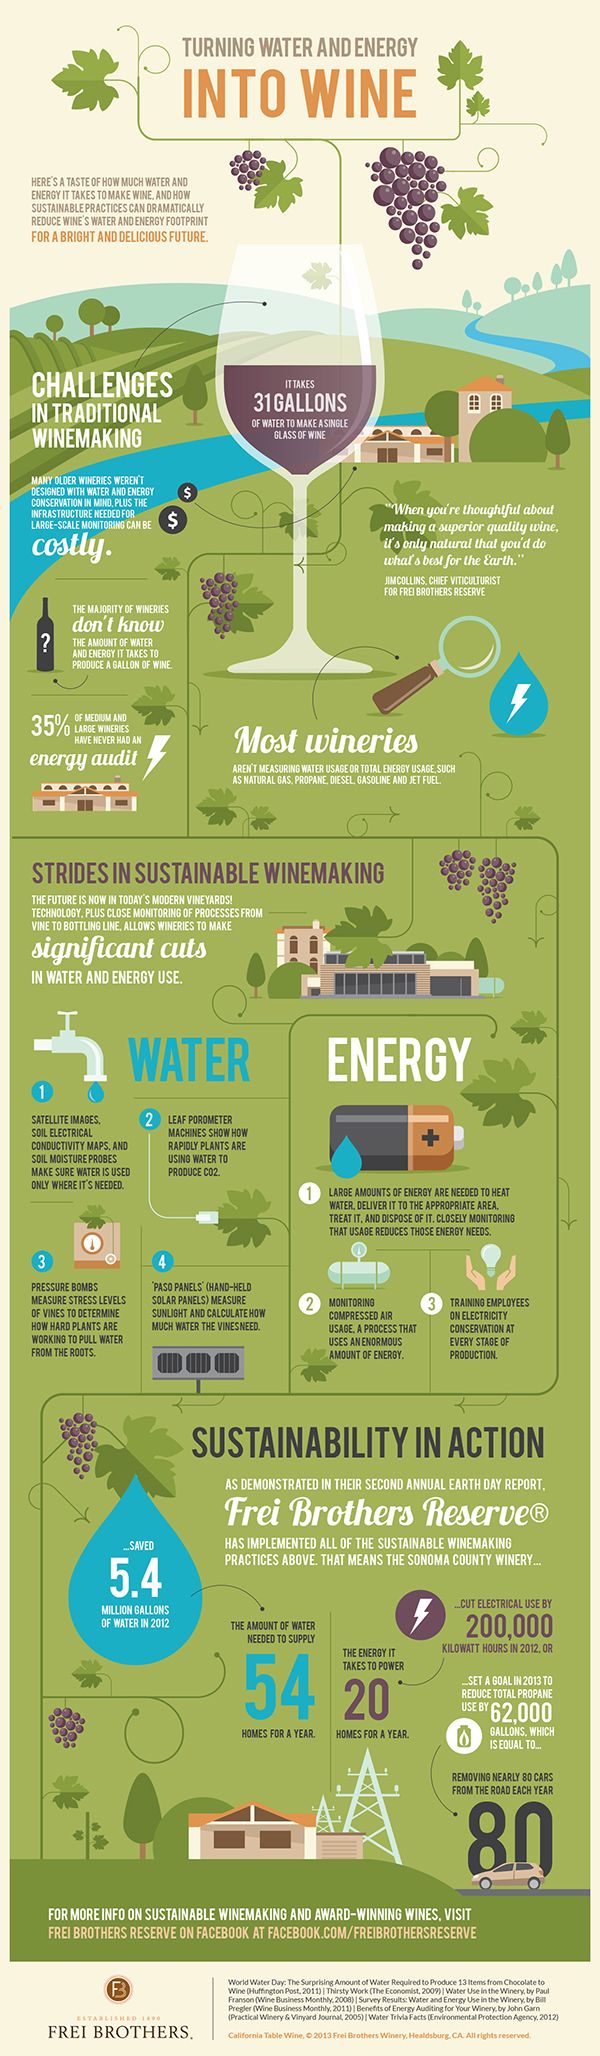 Turning Water and Energy Into Wine